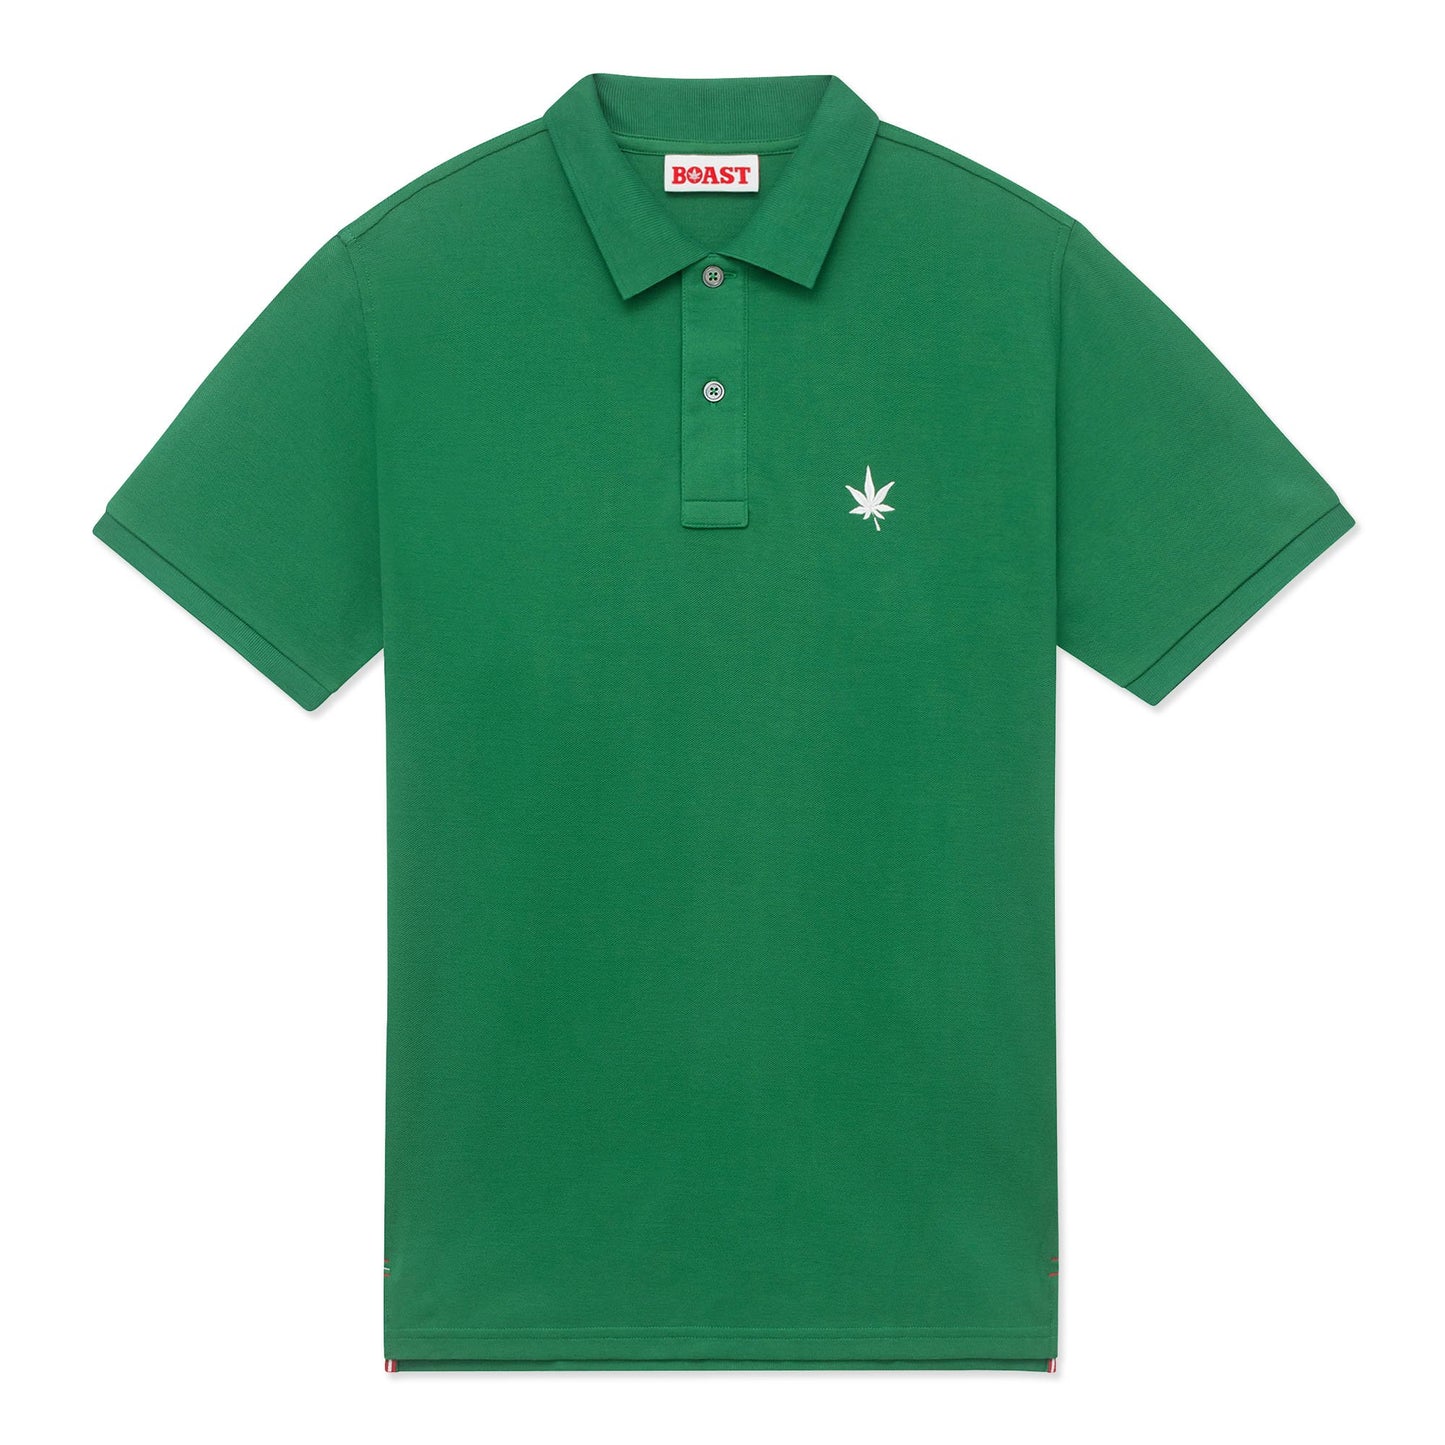 Green polo with white embroidered leaf on the left chest.